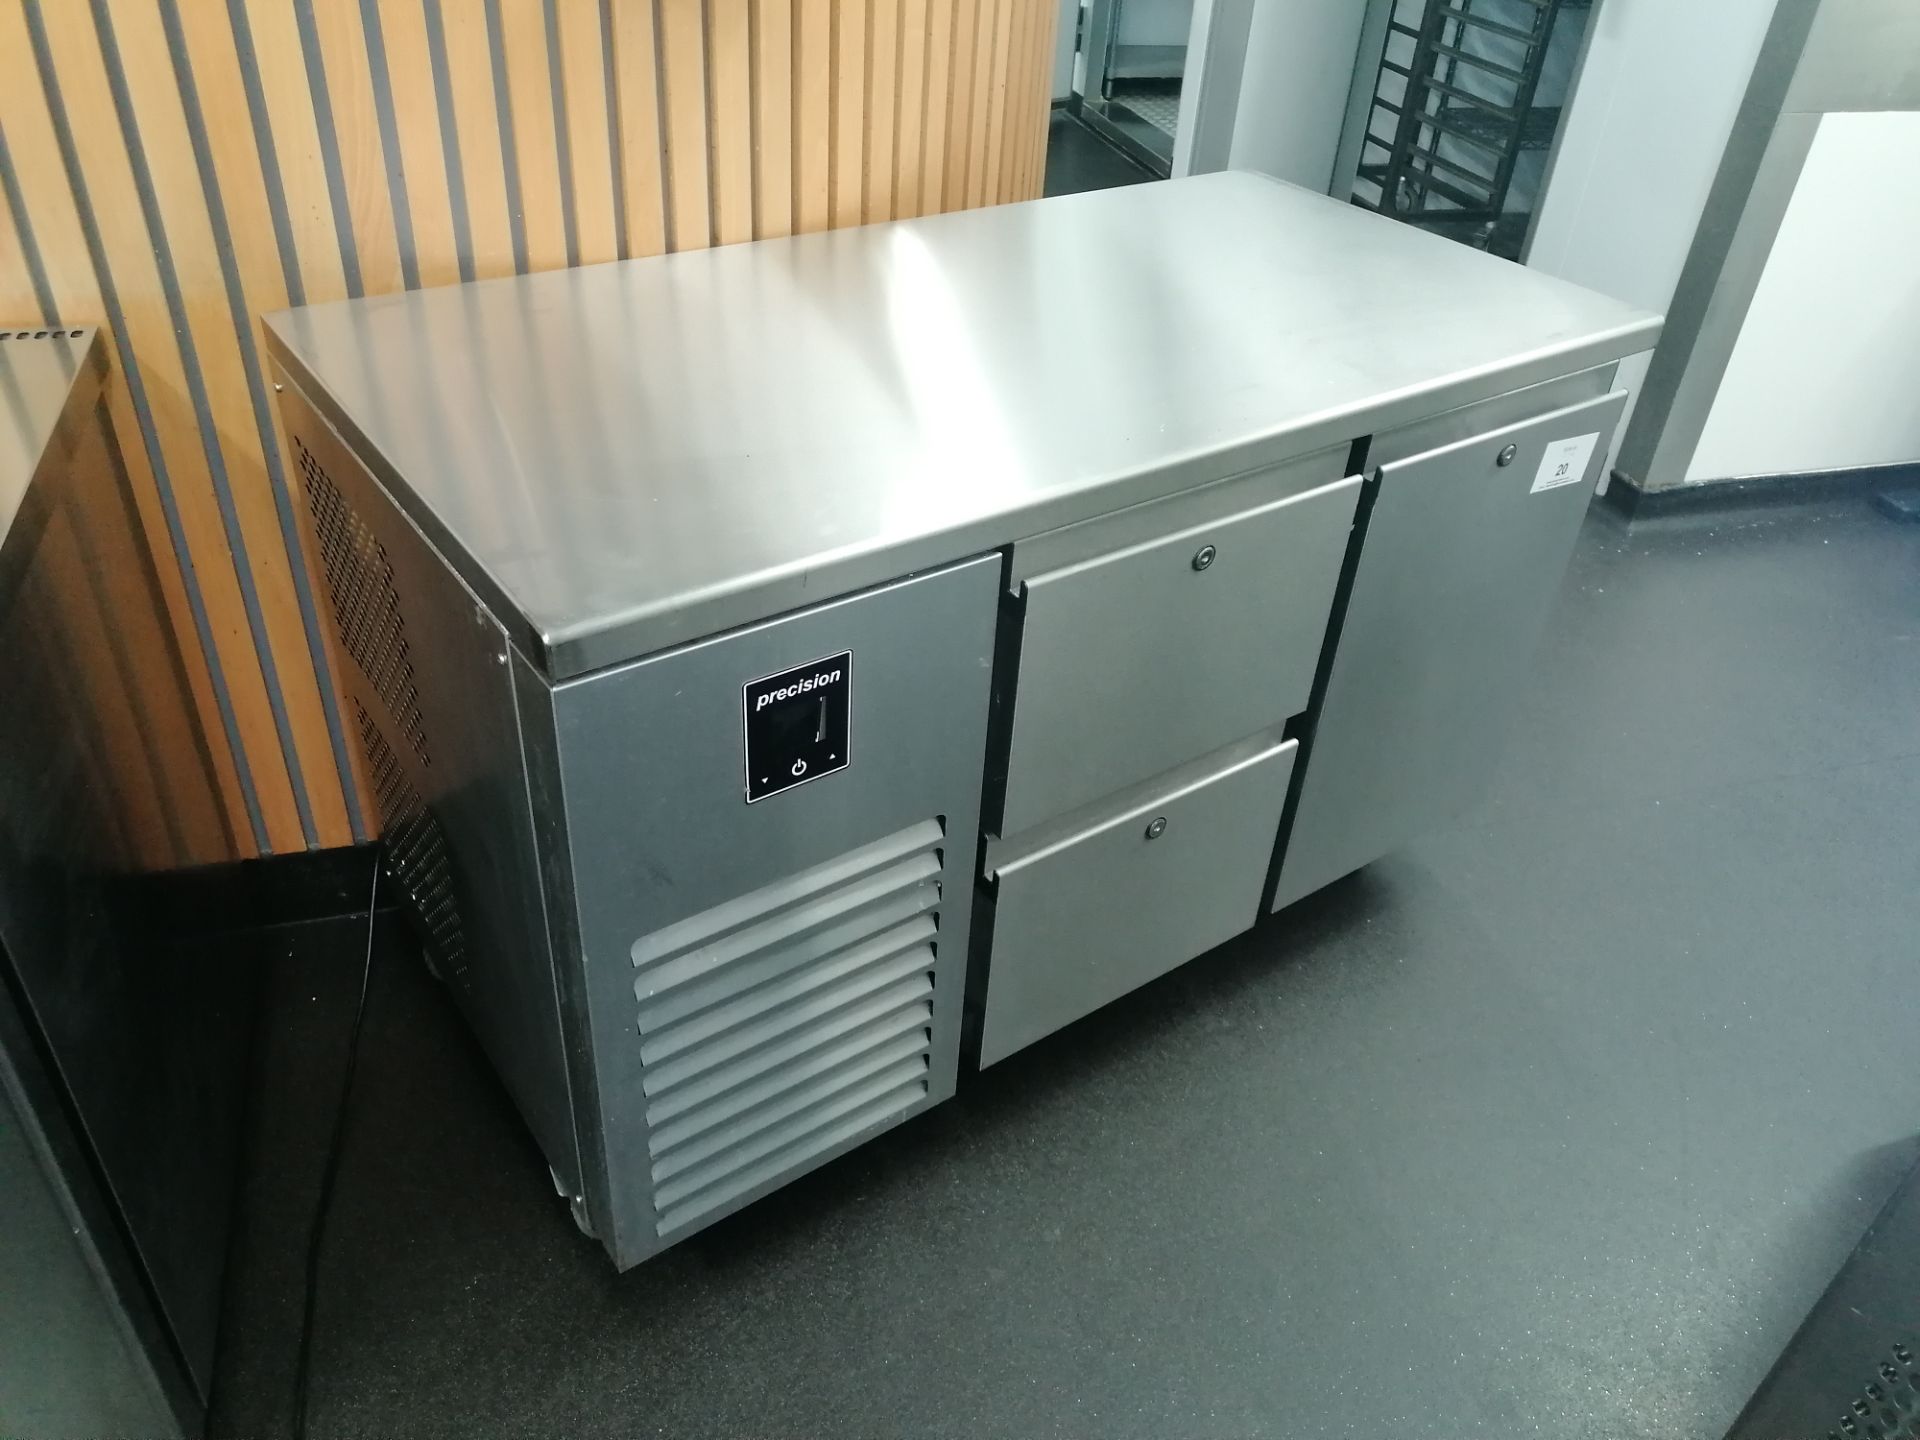 Precision MCU 211 Stainless steel Two Door Counter